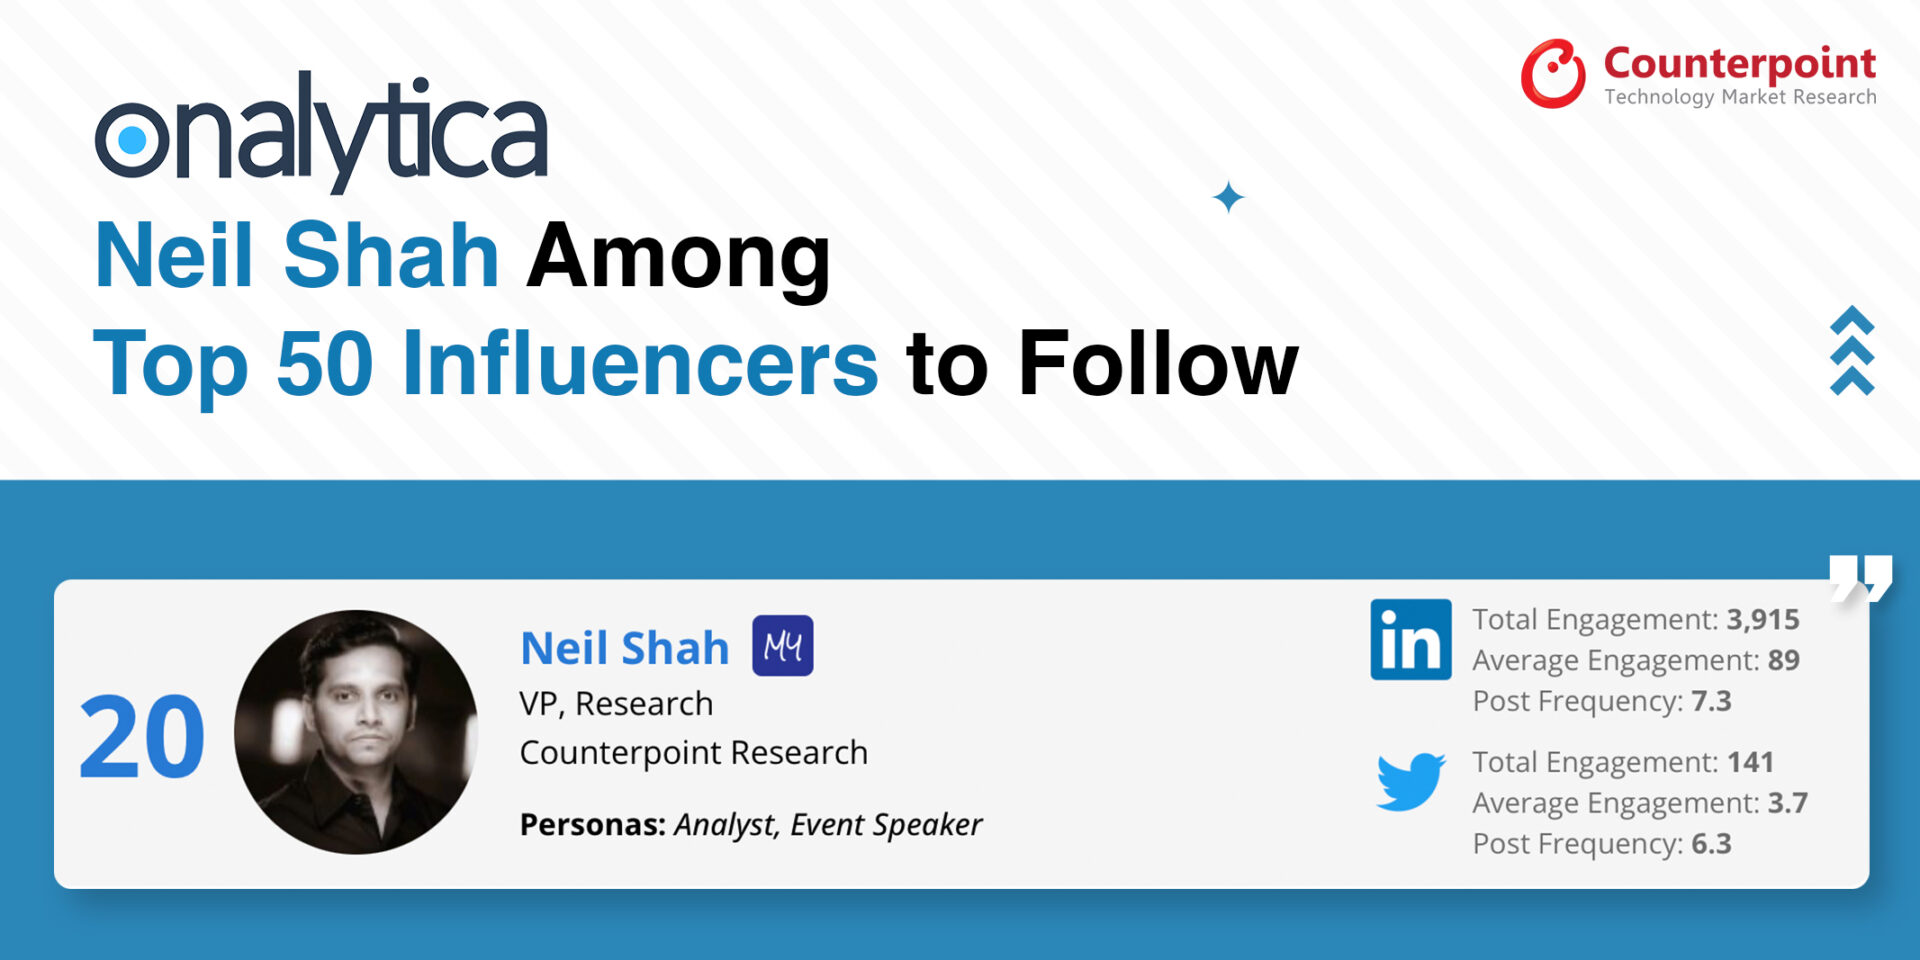 Onalytica Top 50 Influencers Ft. Neil Shah